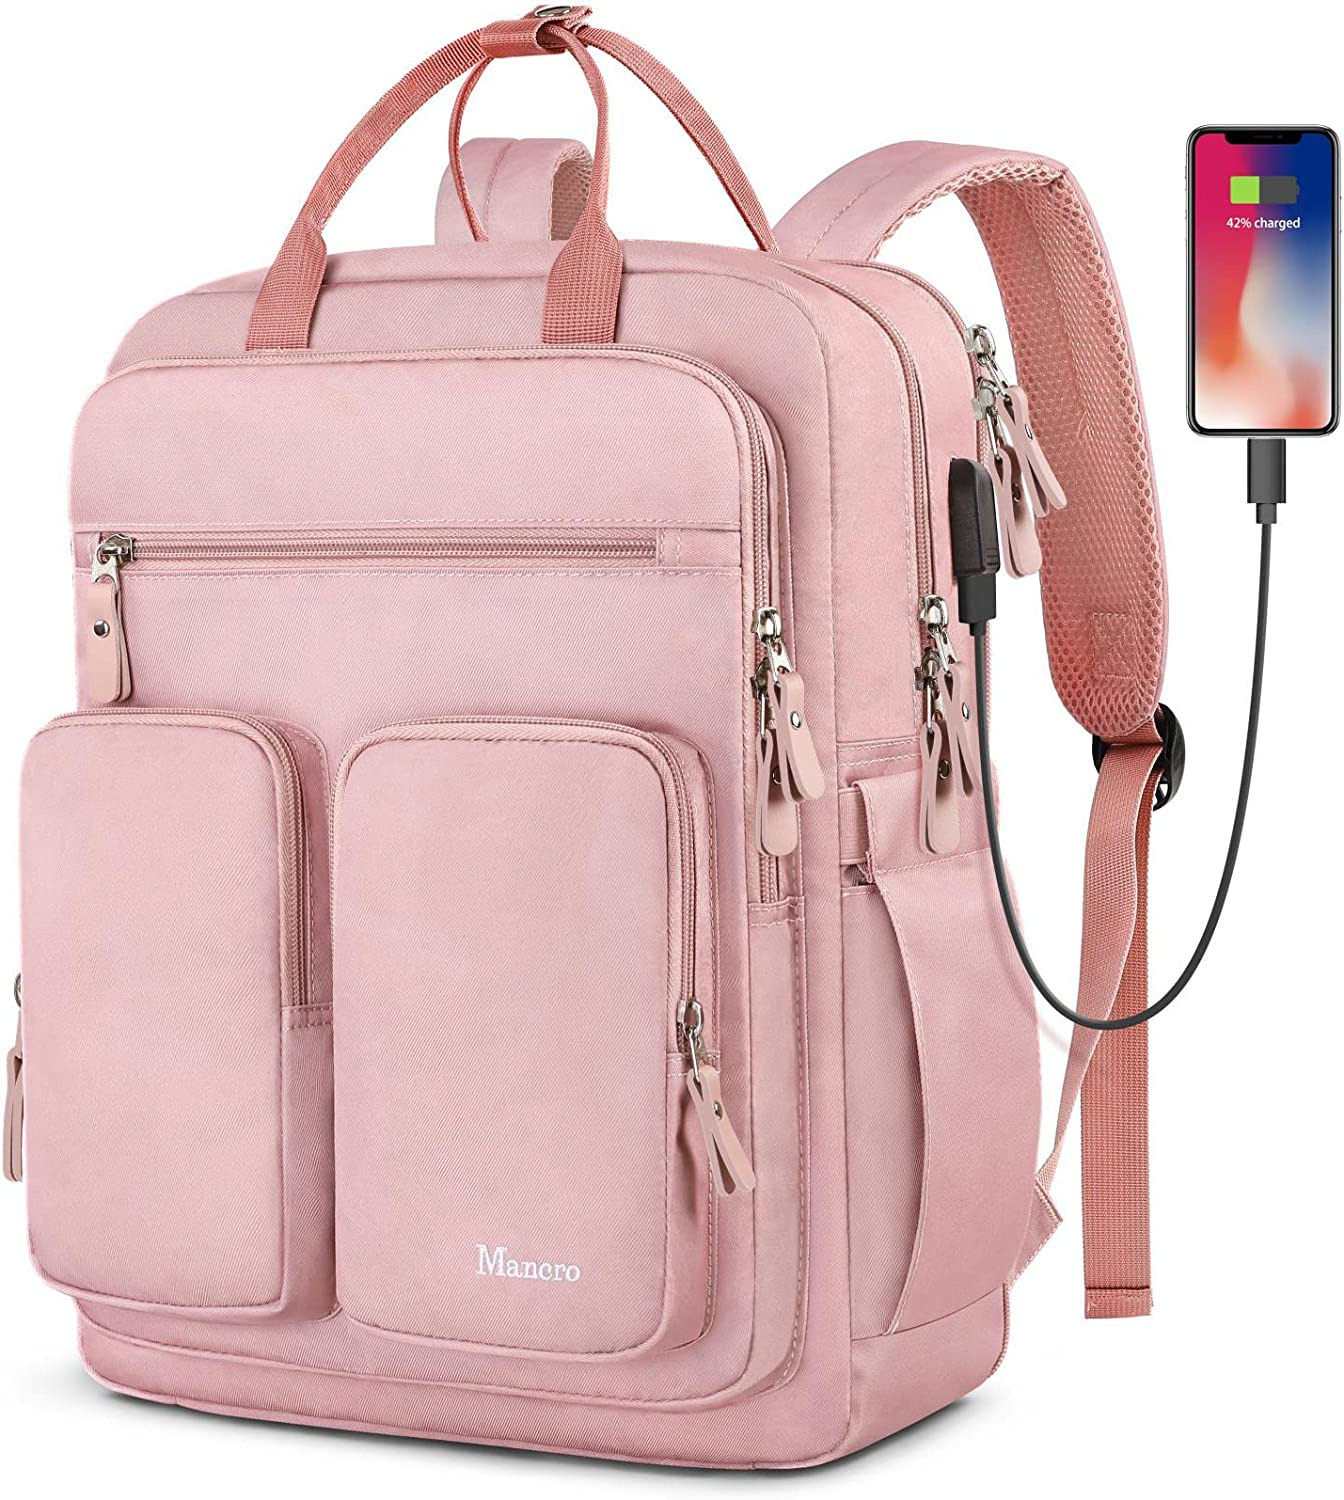 Travel Backpack for Women, 15.6 Inch Laptop Backpack with USB Charging Port, Wat